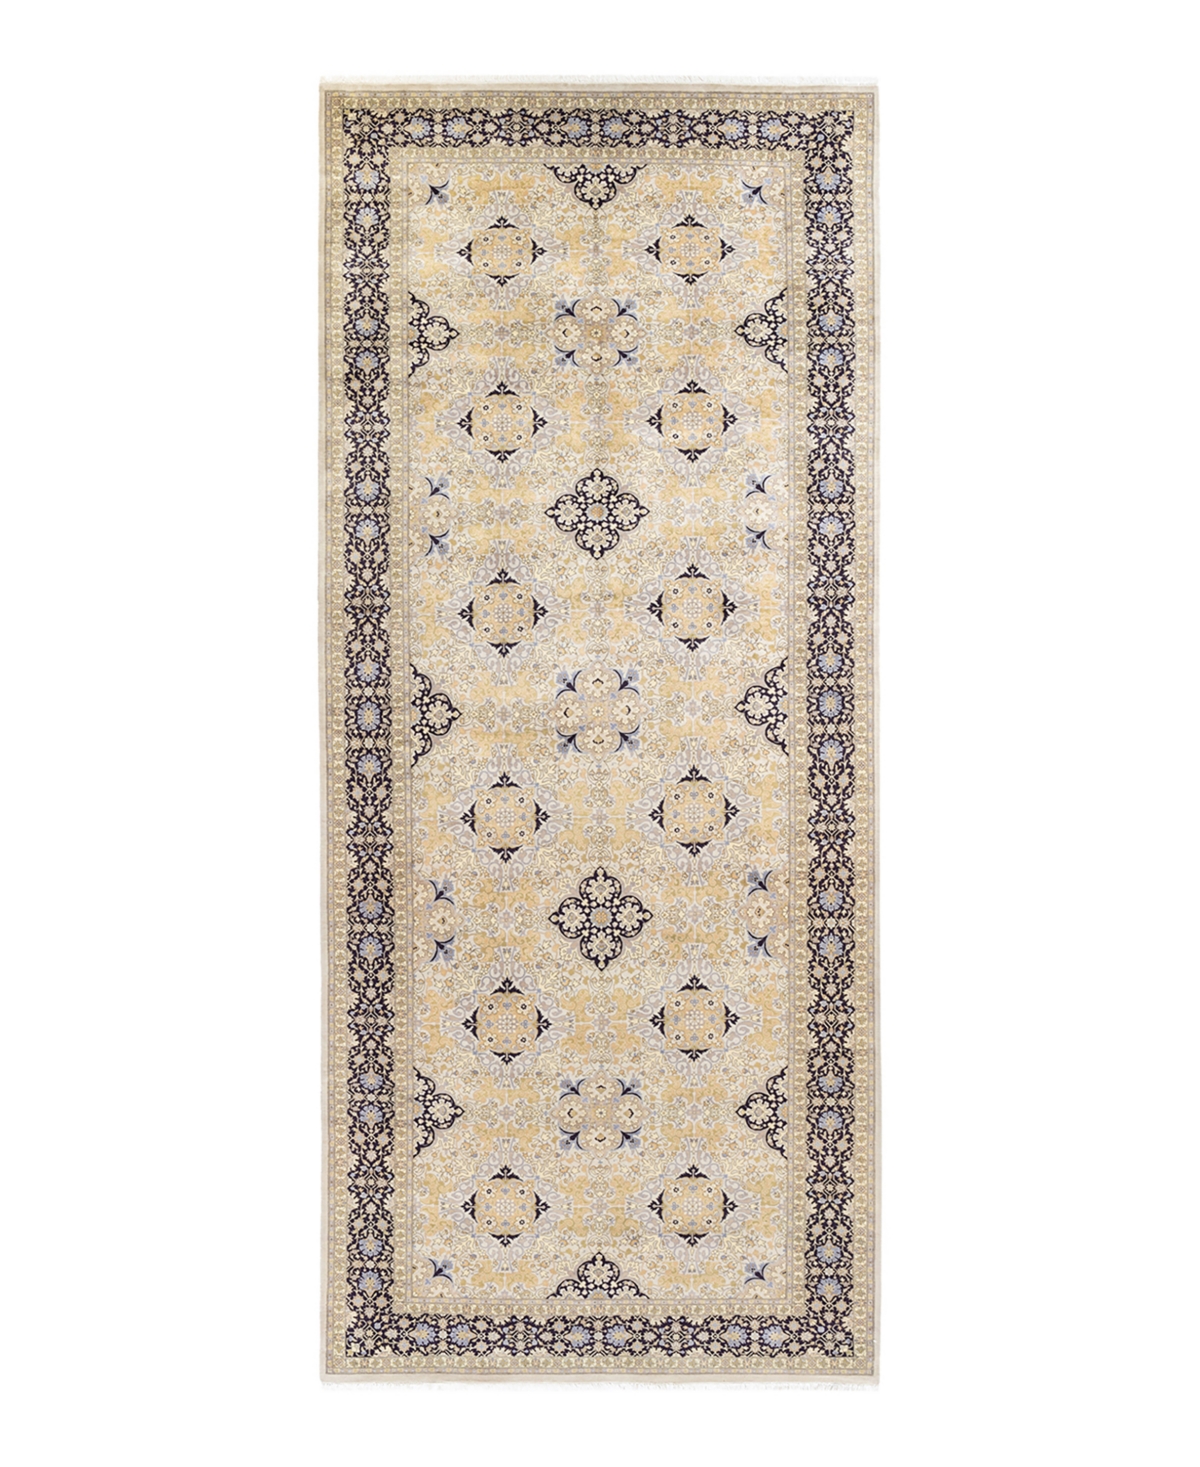 Closeout! Adorn Hand Woven Rugs Mogul M1196 6'4in x 15'3in Runner Area Rug - Gold-Tone